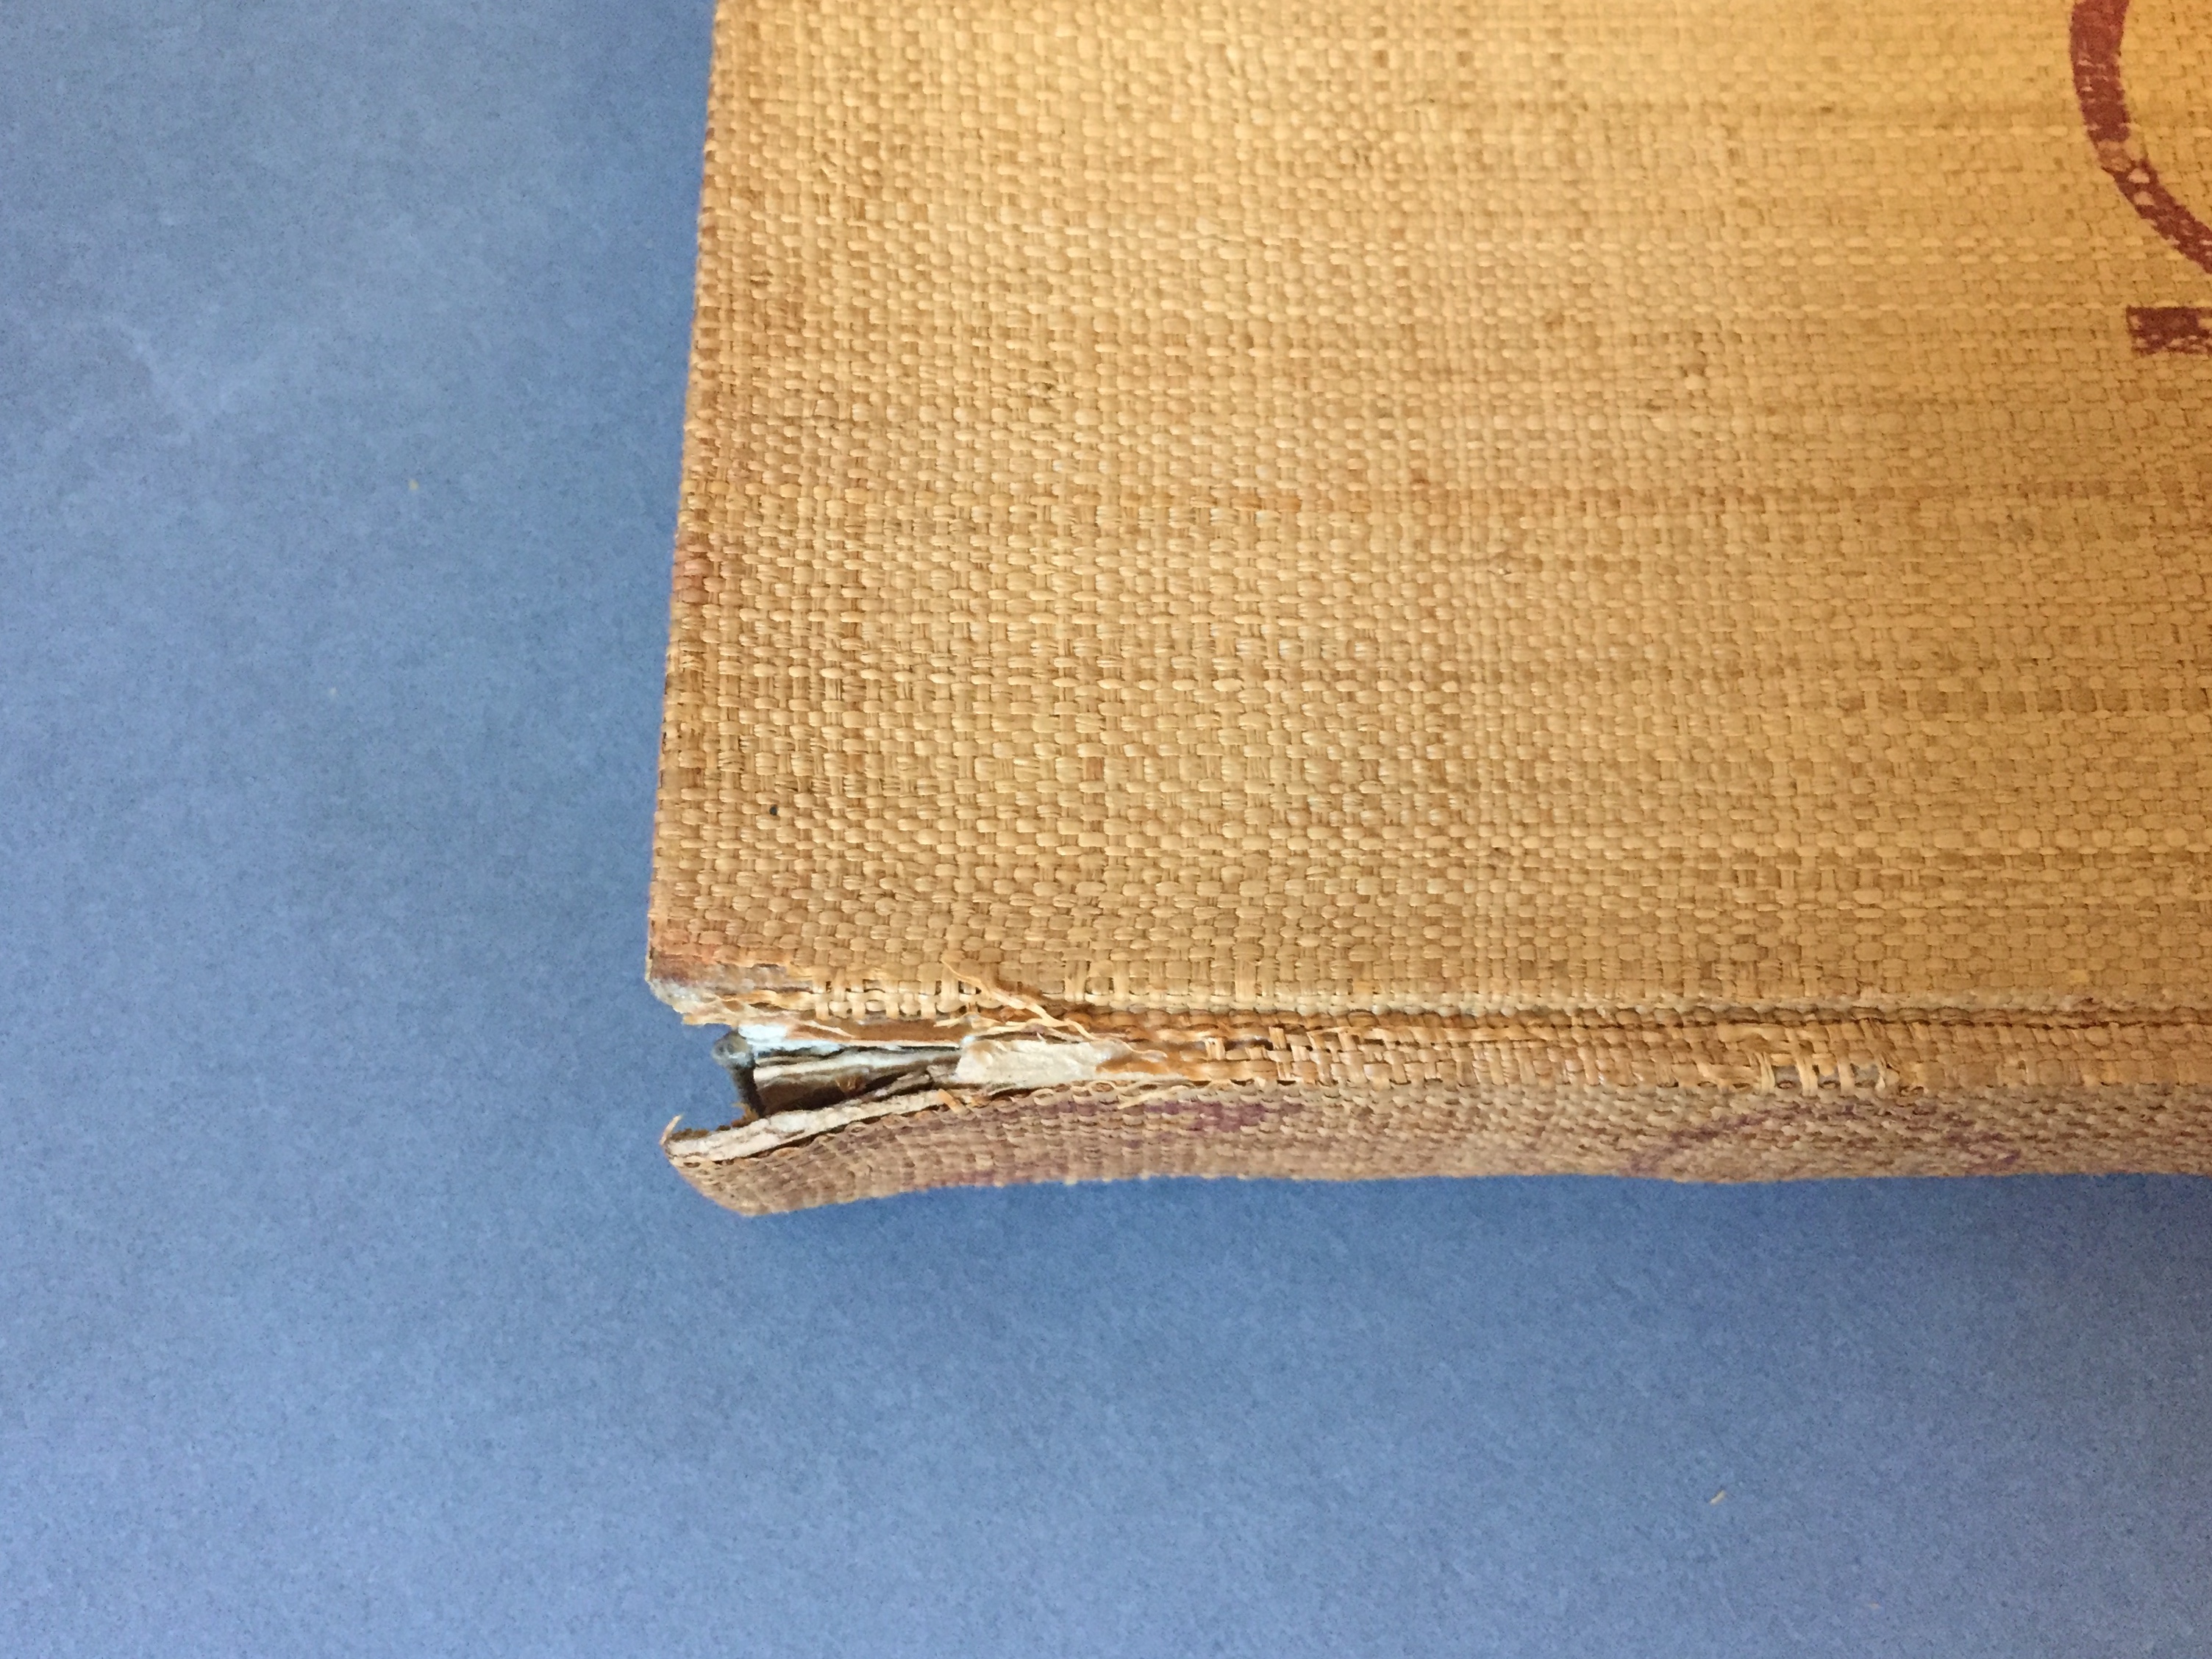 A picture of the top of the spine before treatment showing a split in the cover material.